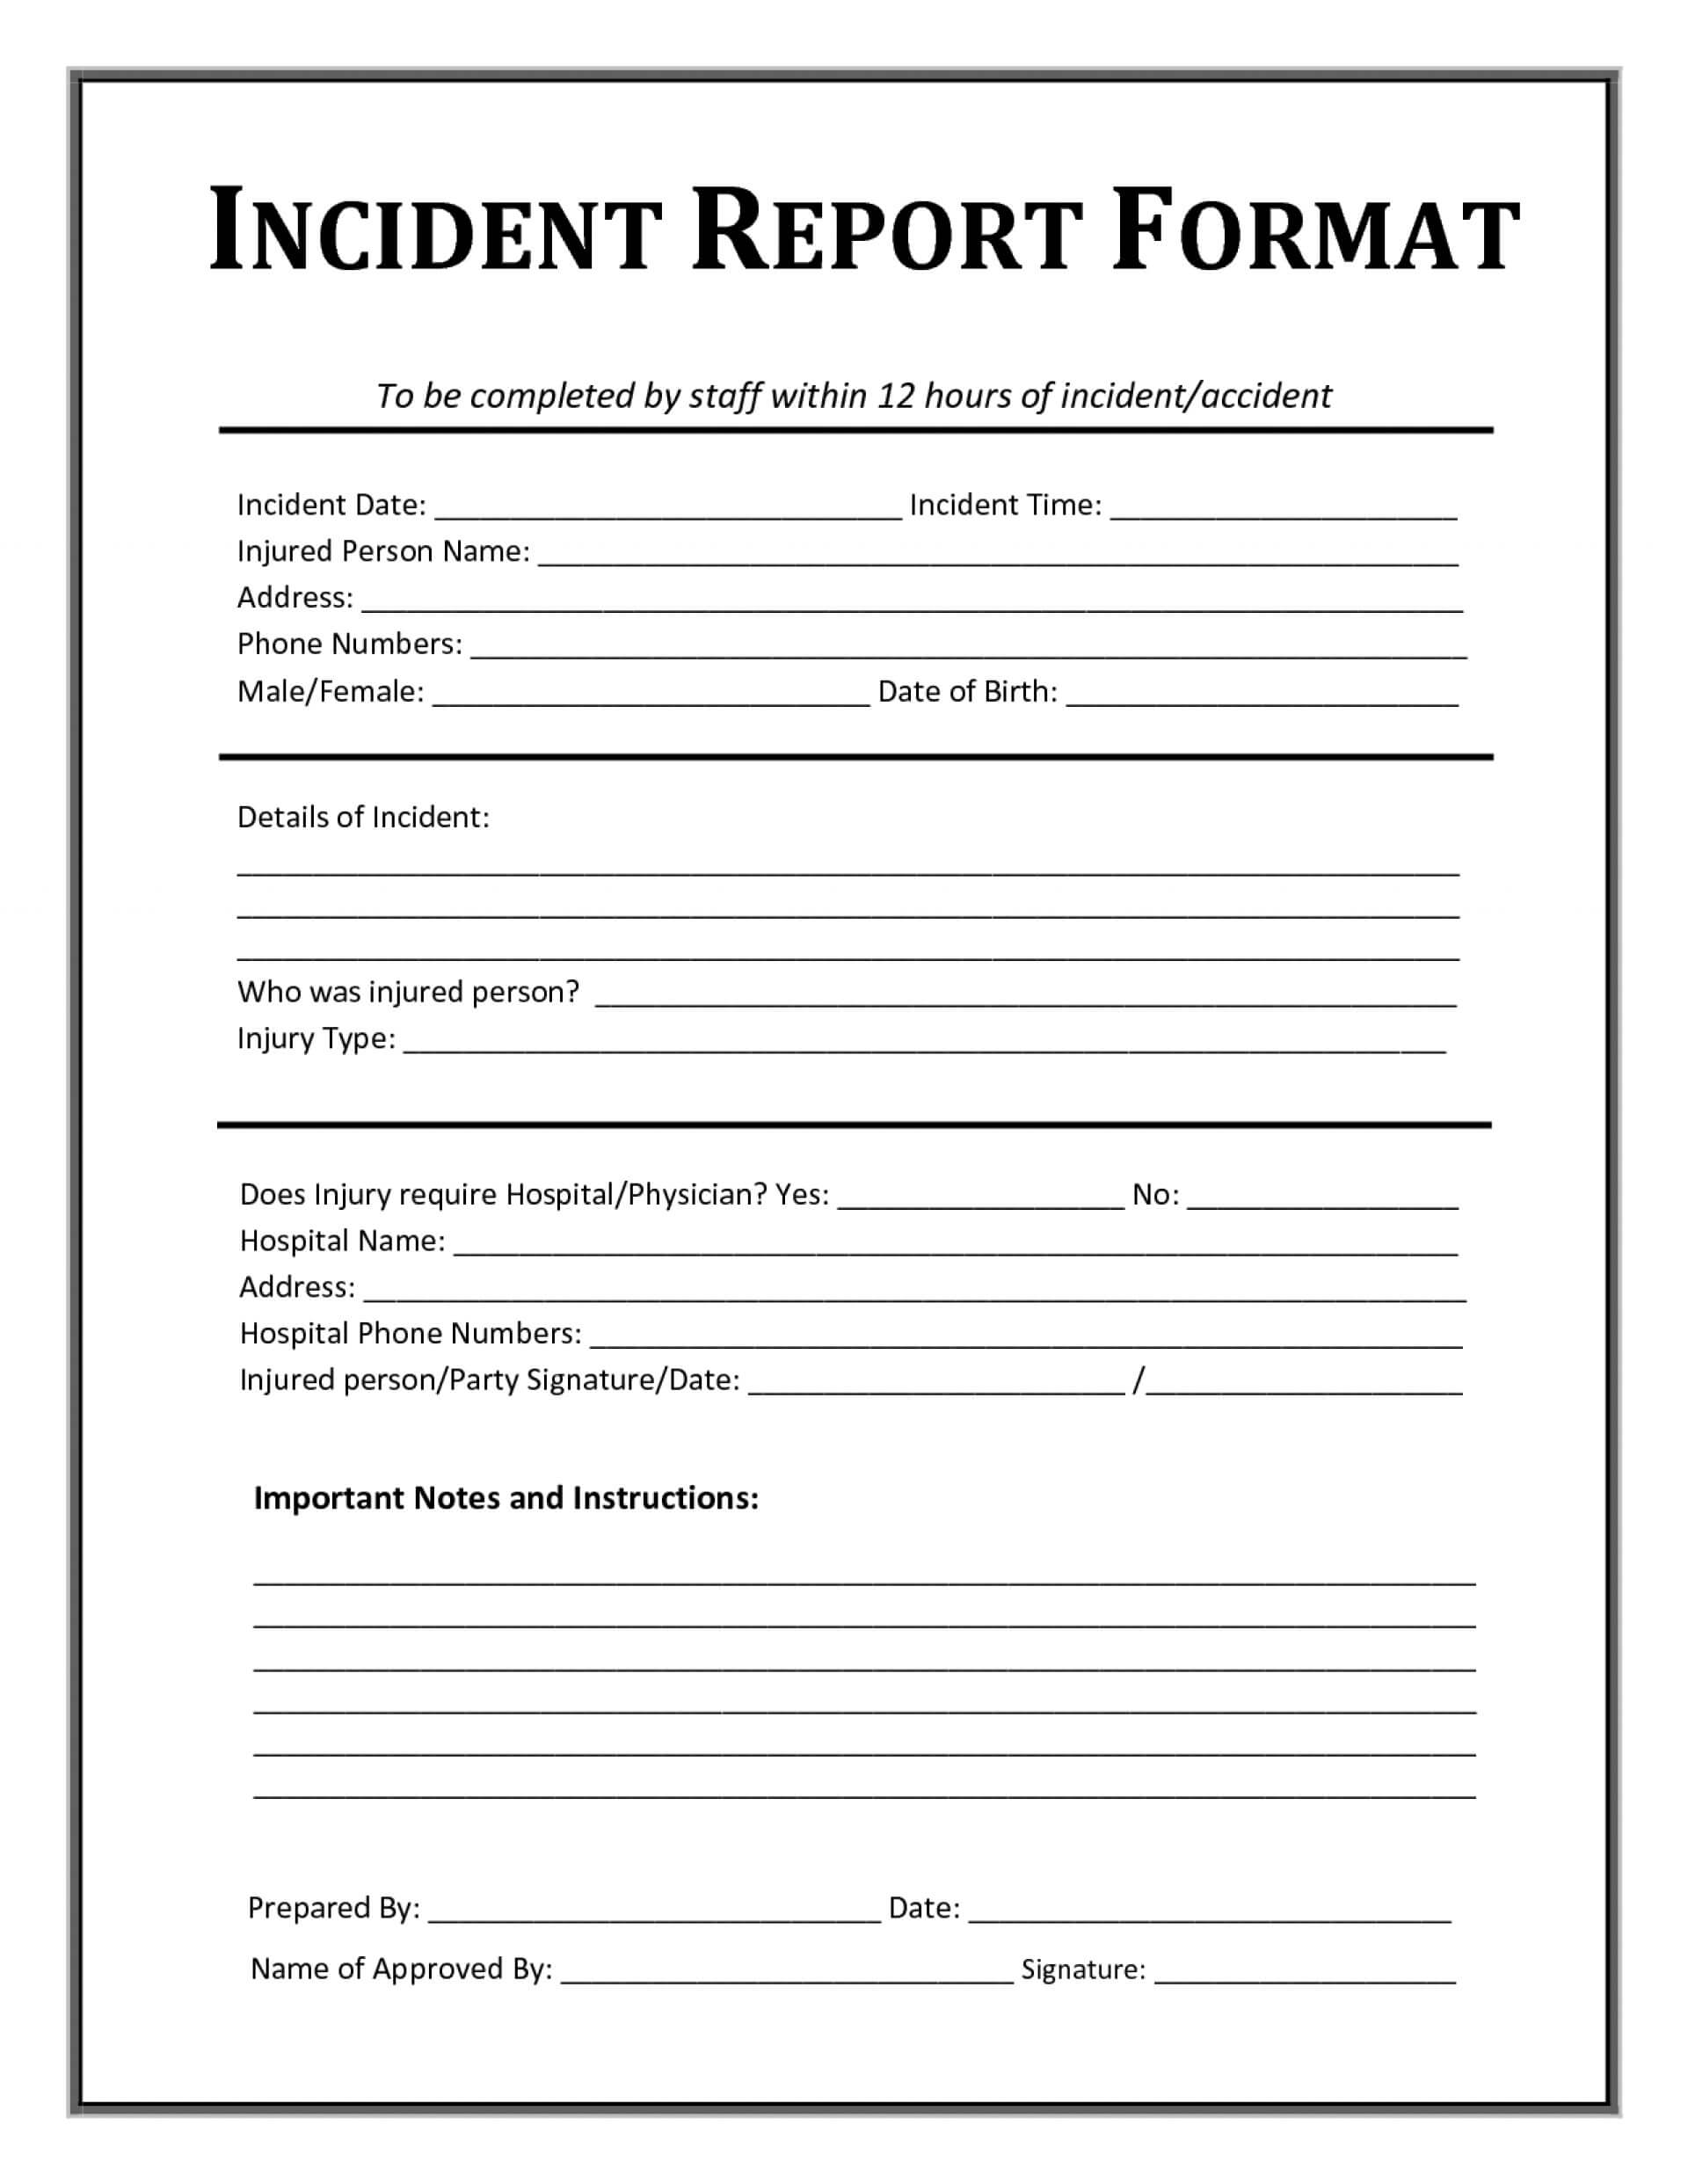 006 Incident Report Template Form Word Rare Ideas Uk With Incident Report Template Uk